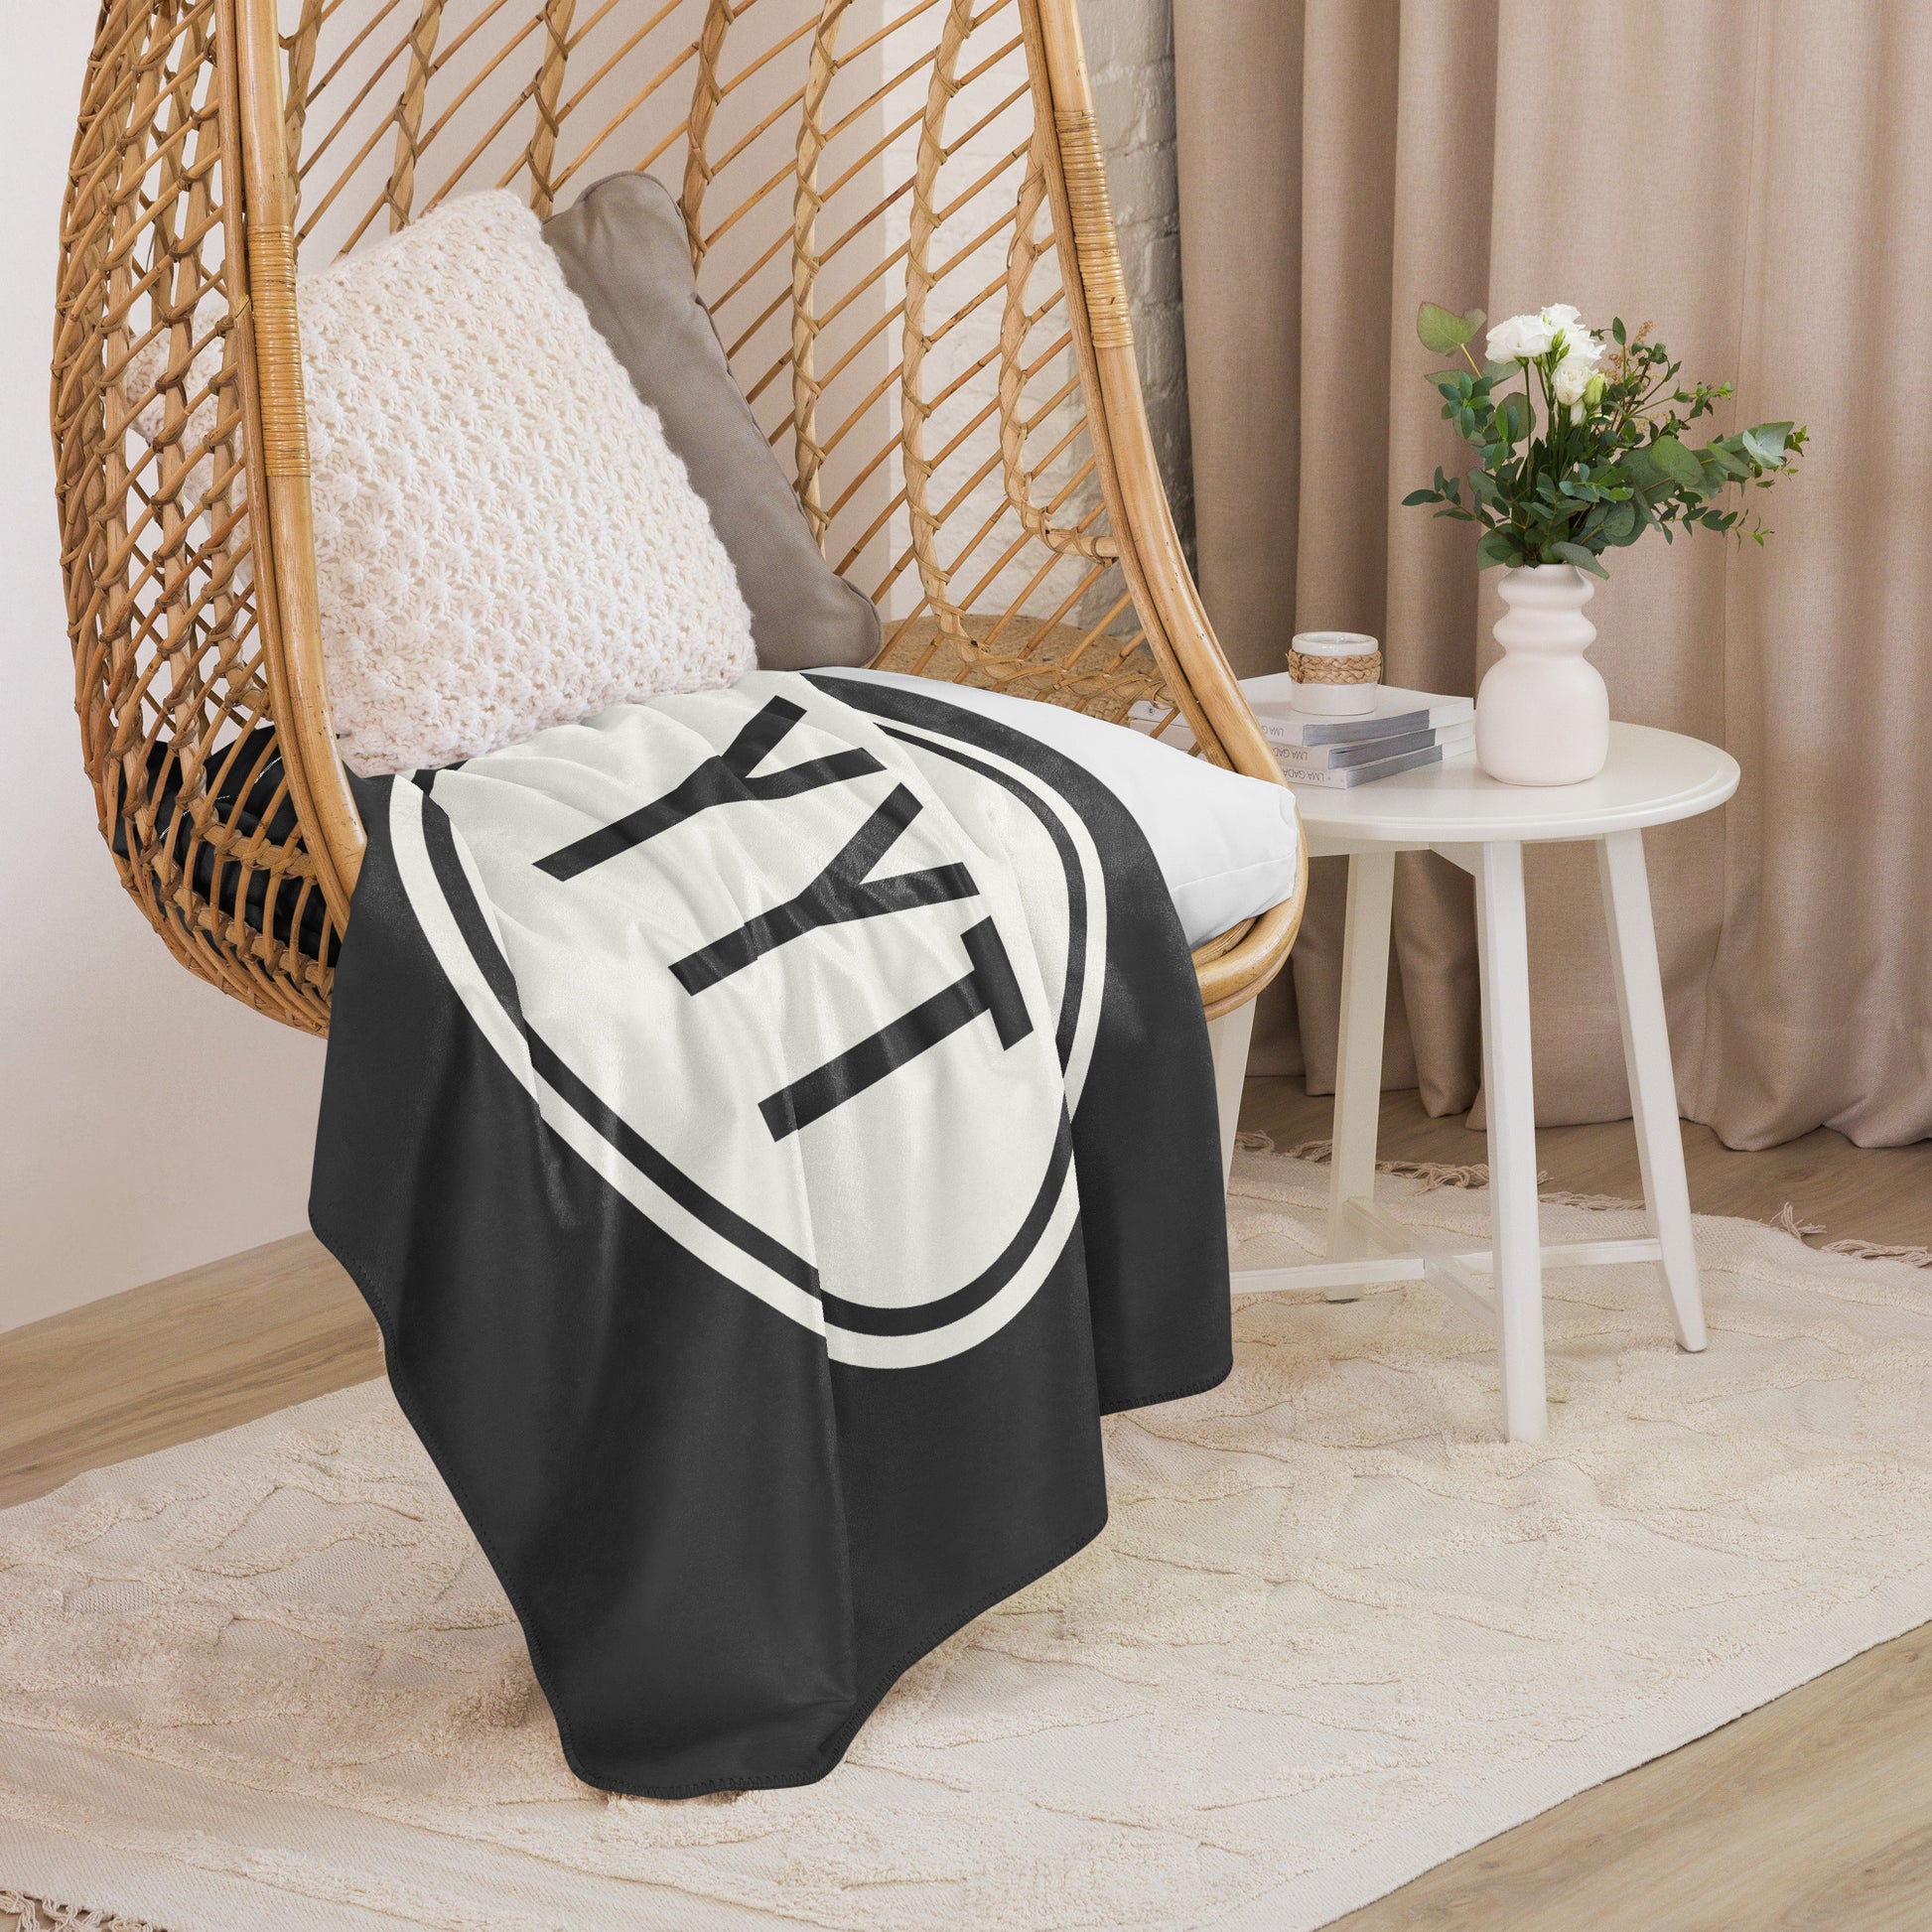 Unique Travel Gift Sherpa Blanket - White Oval • YYT St. John's • YHM Designs - Image 06